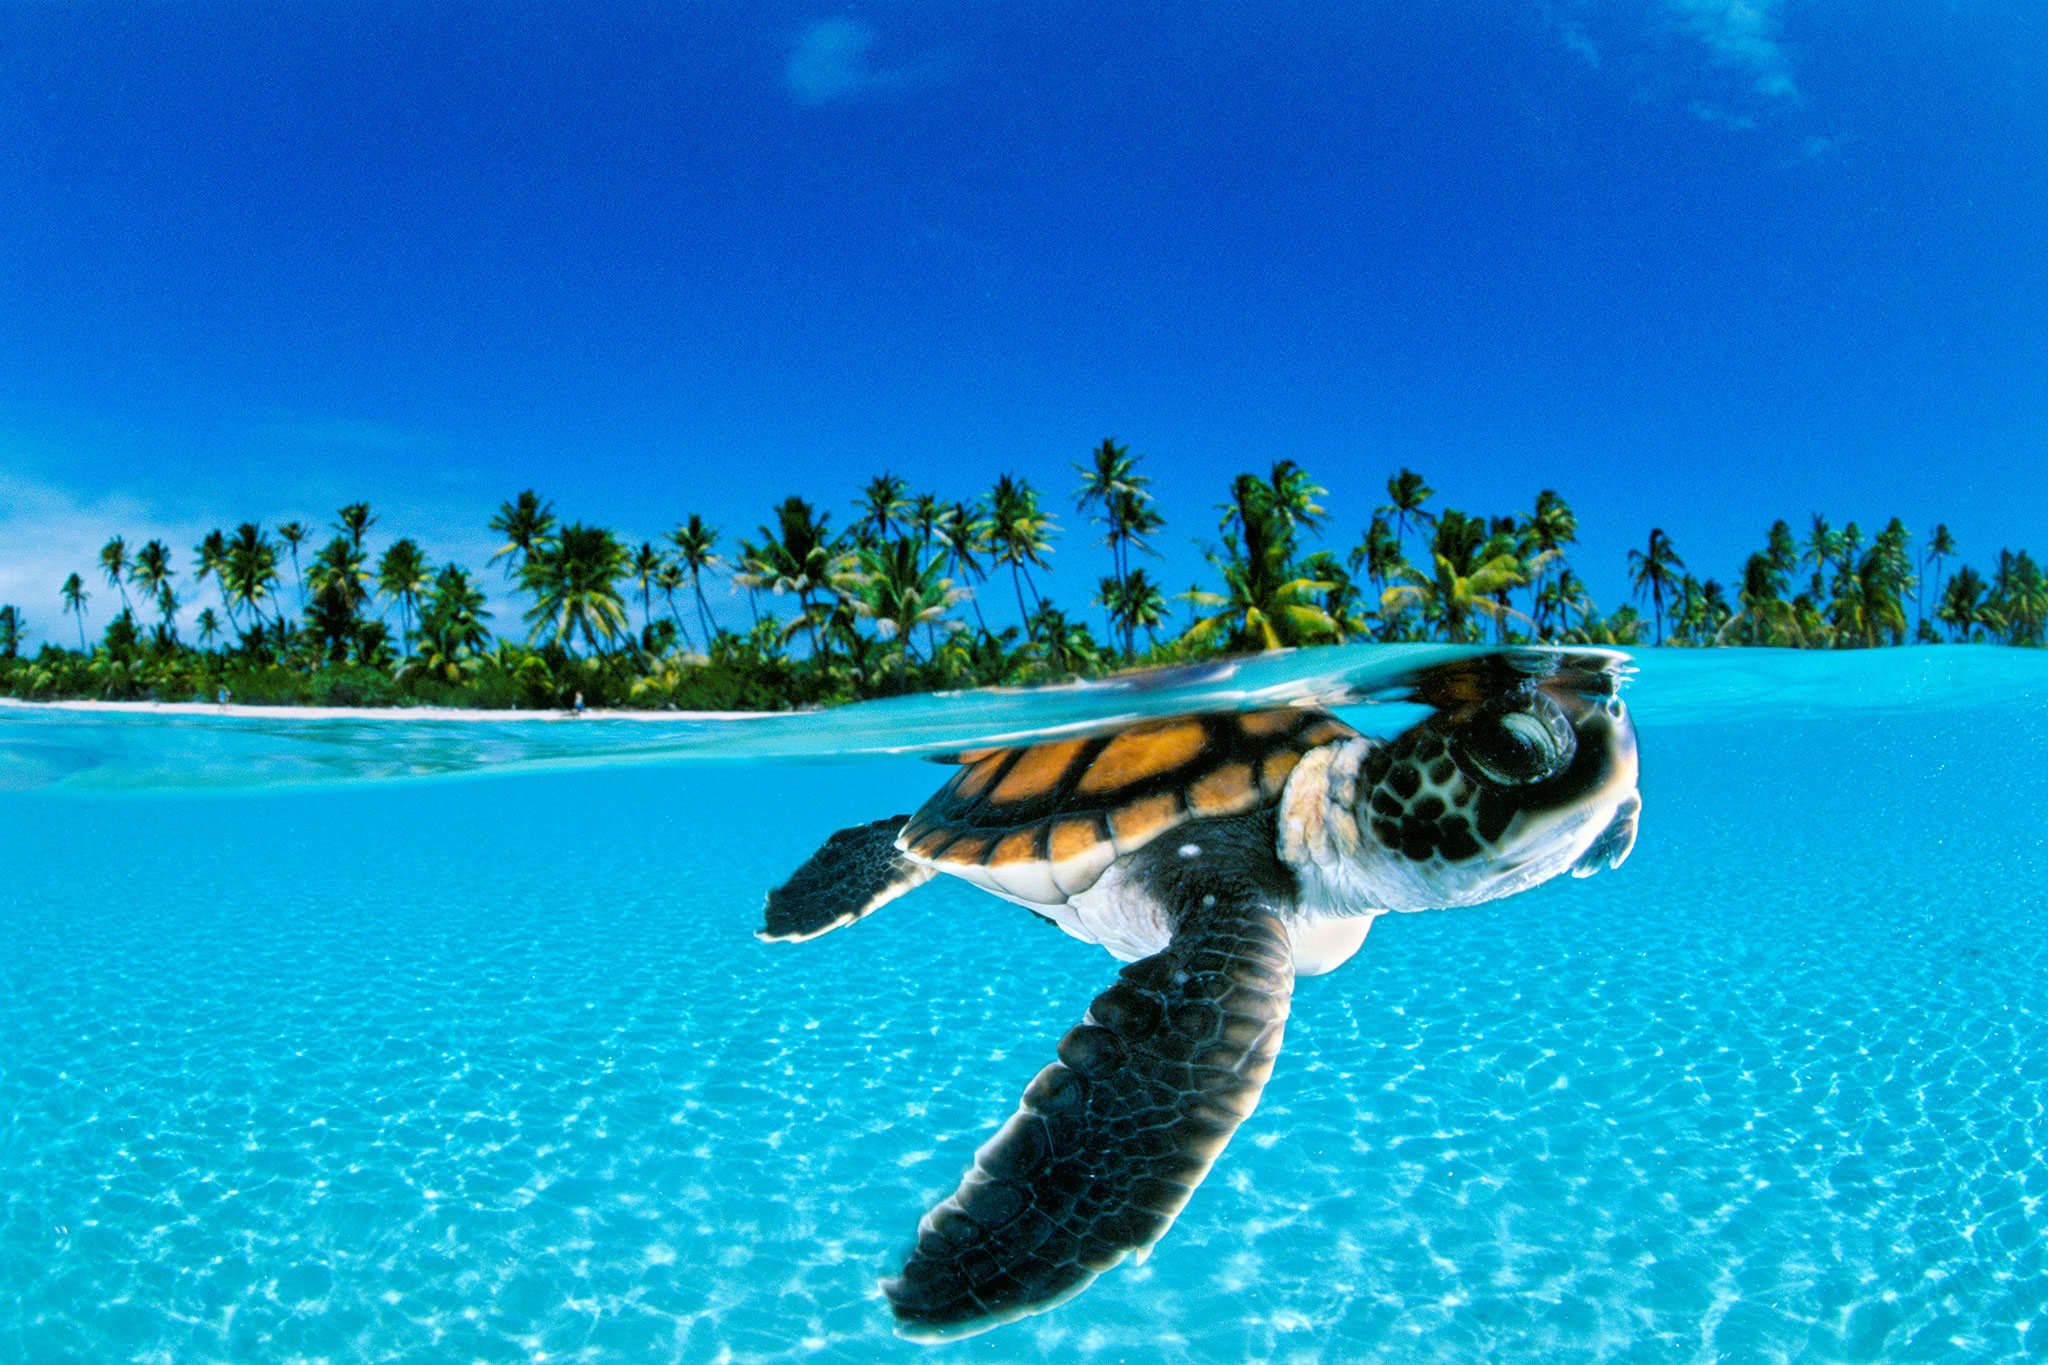 Why Life Is So Tough for Sea Turtles